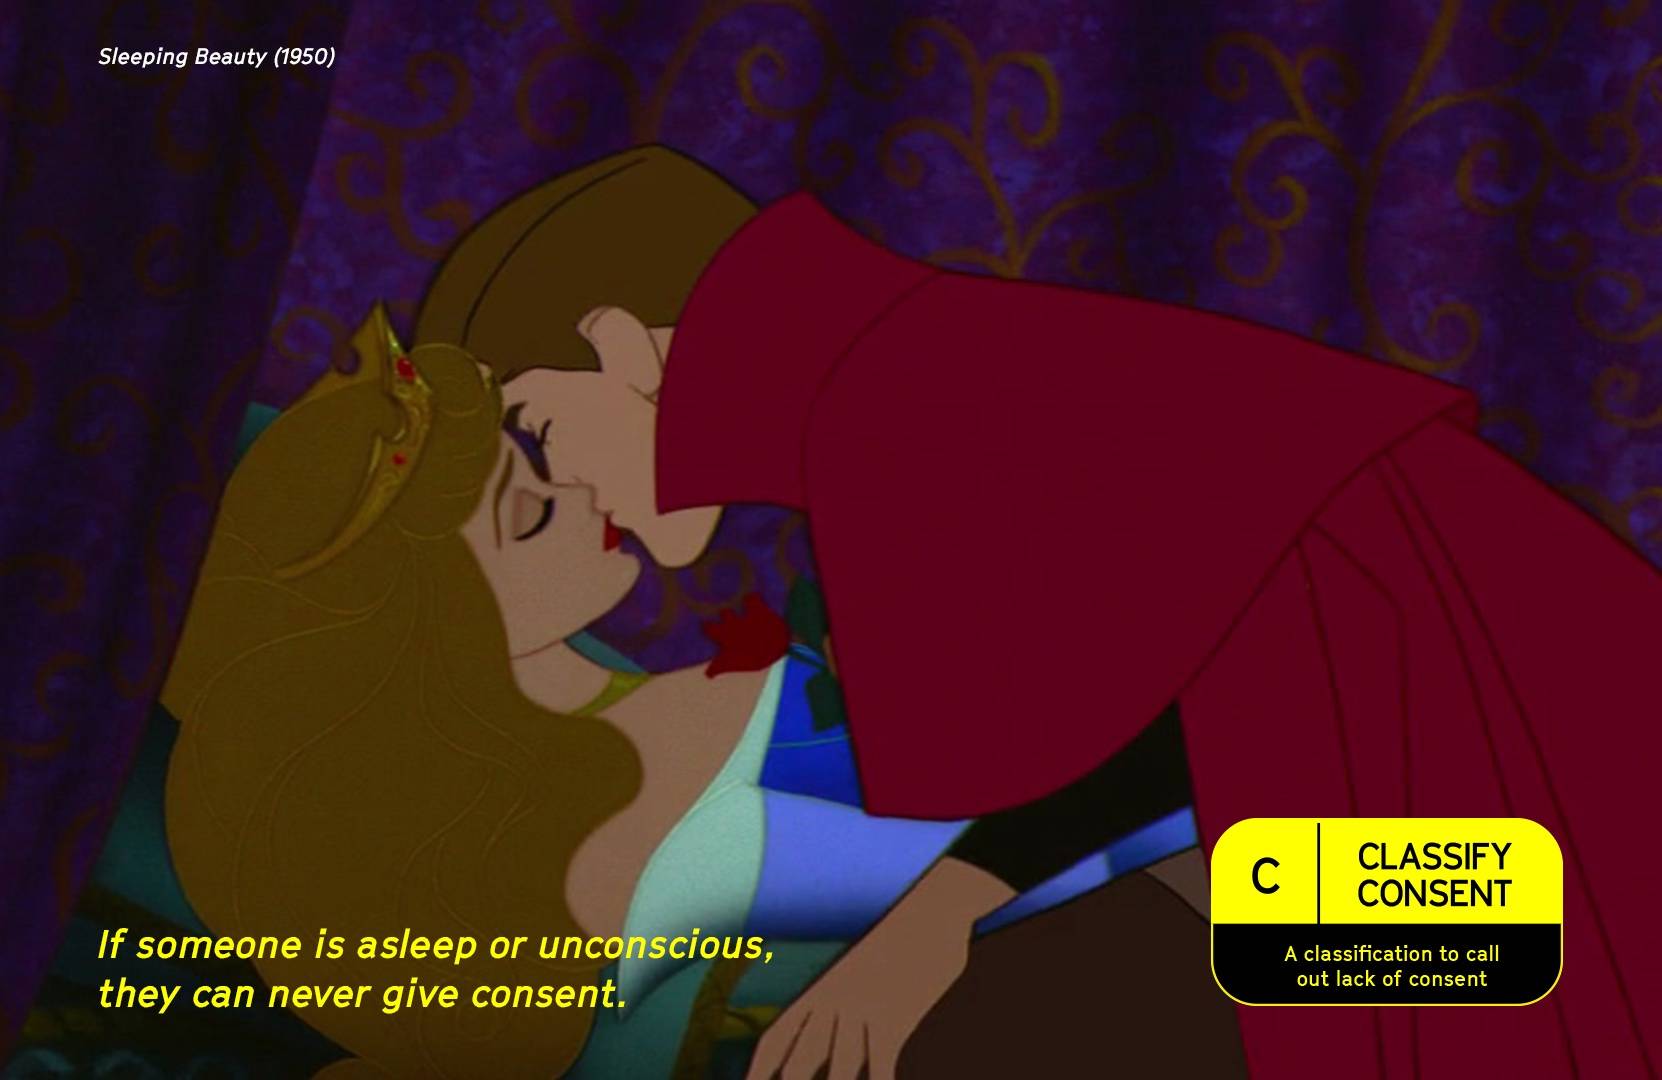 A scene from "Sleeping Beauty" shows the Prince kissing the sleeping Princess. The classify consent rating appears on screen to denote this is an example of non-consensual behavior.